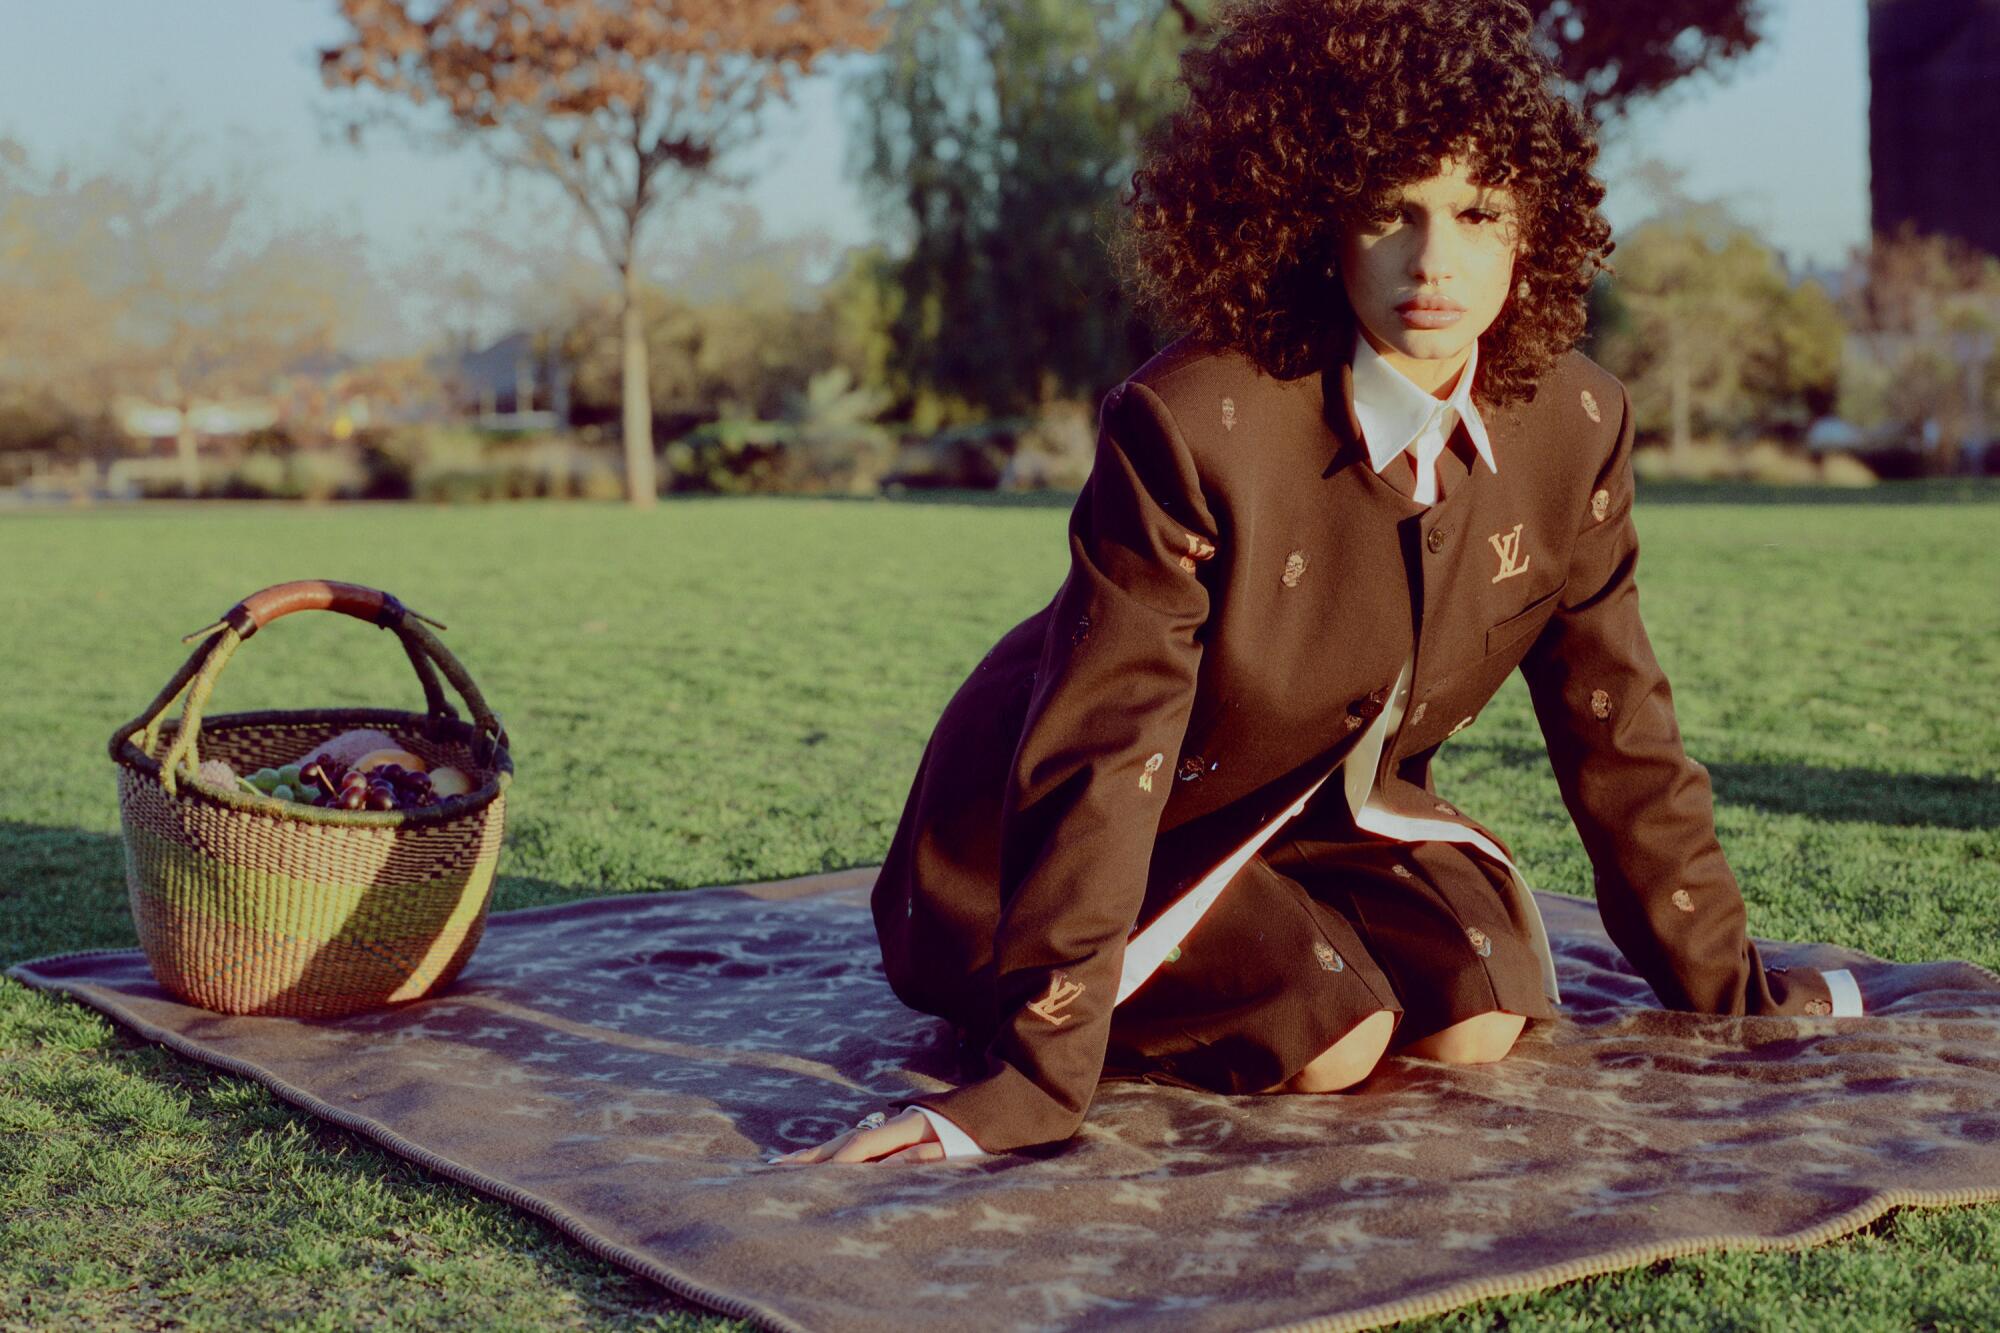 Model wears Louis Vuitton outfit on a picnic blanket in the park.